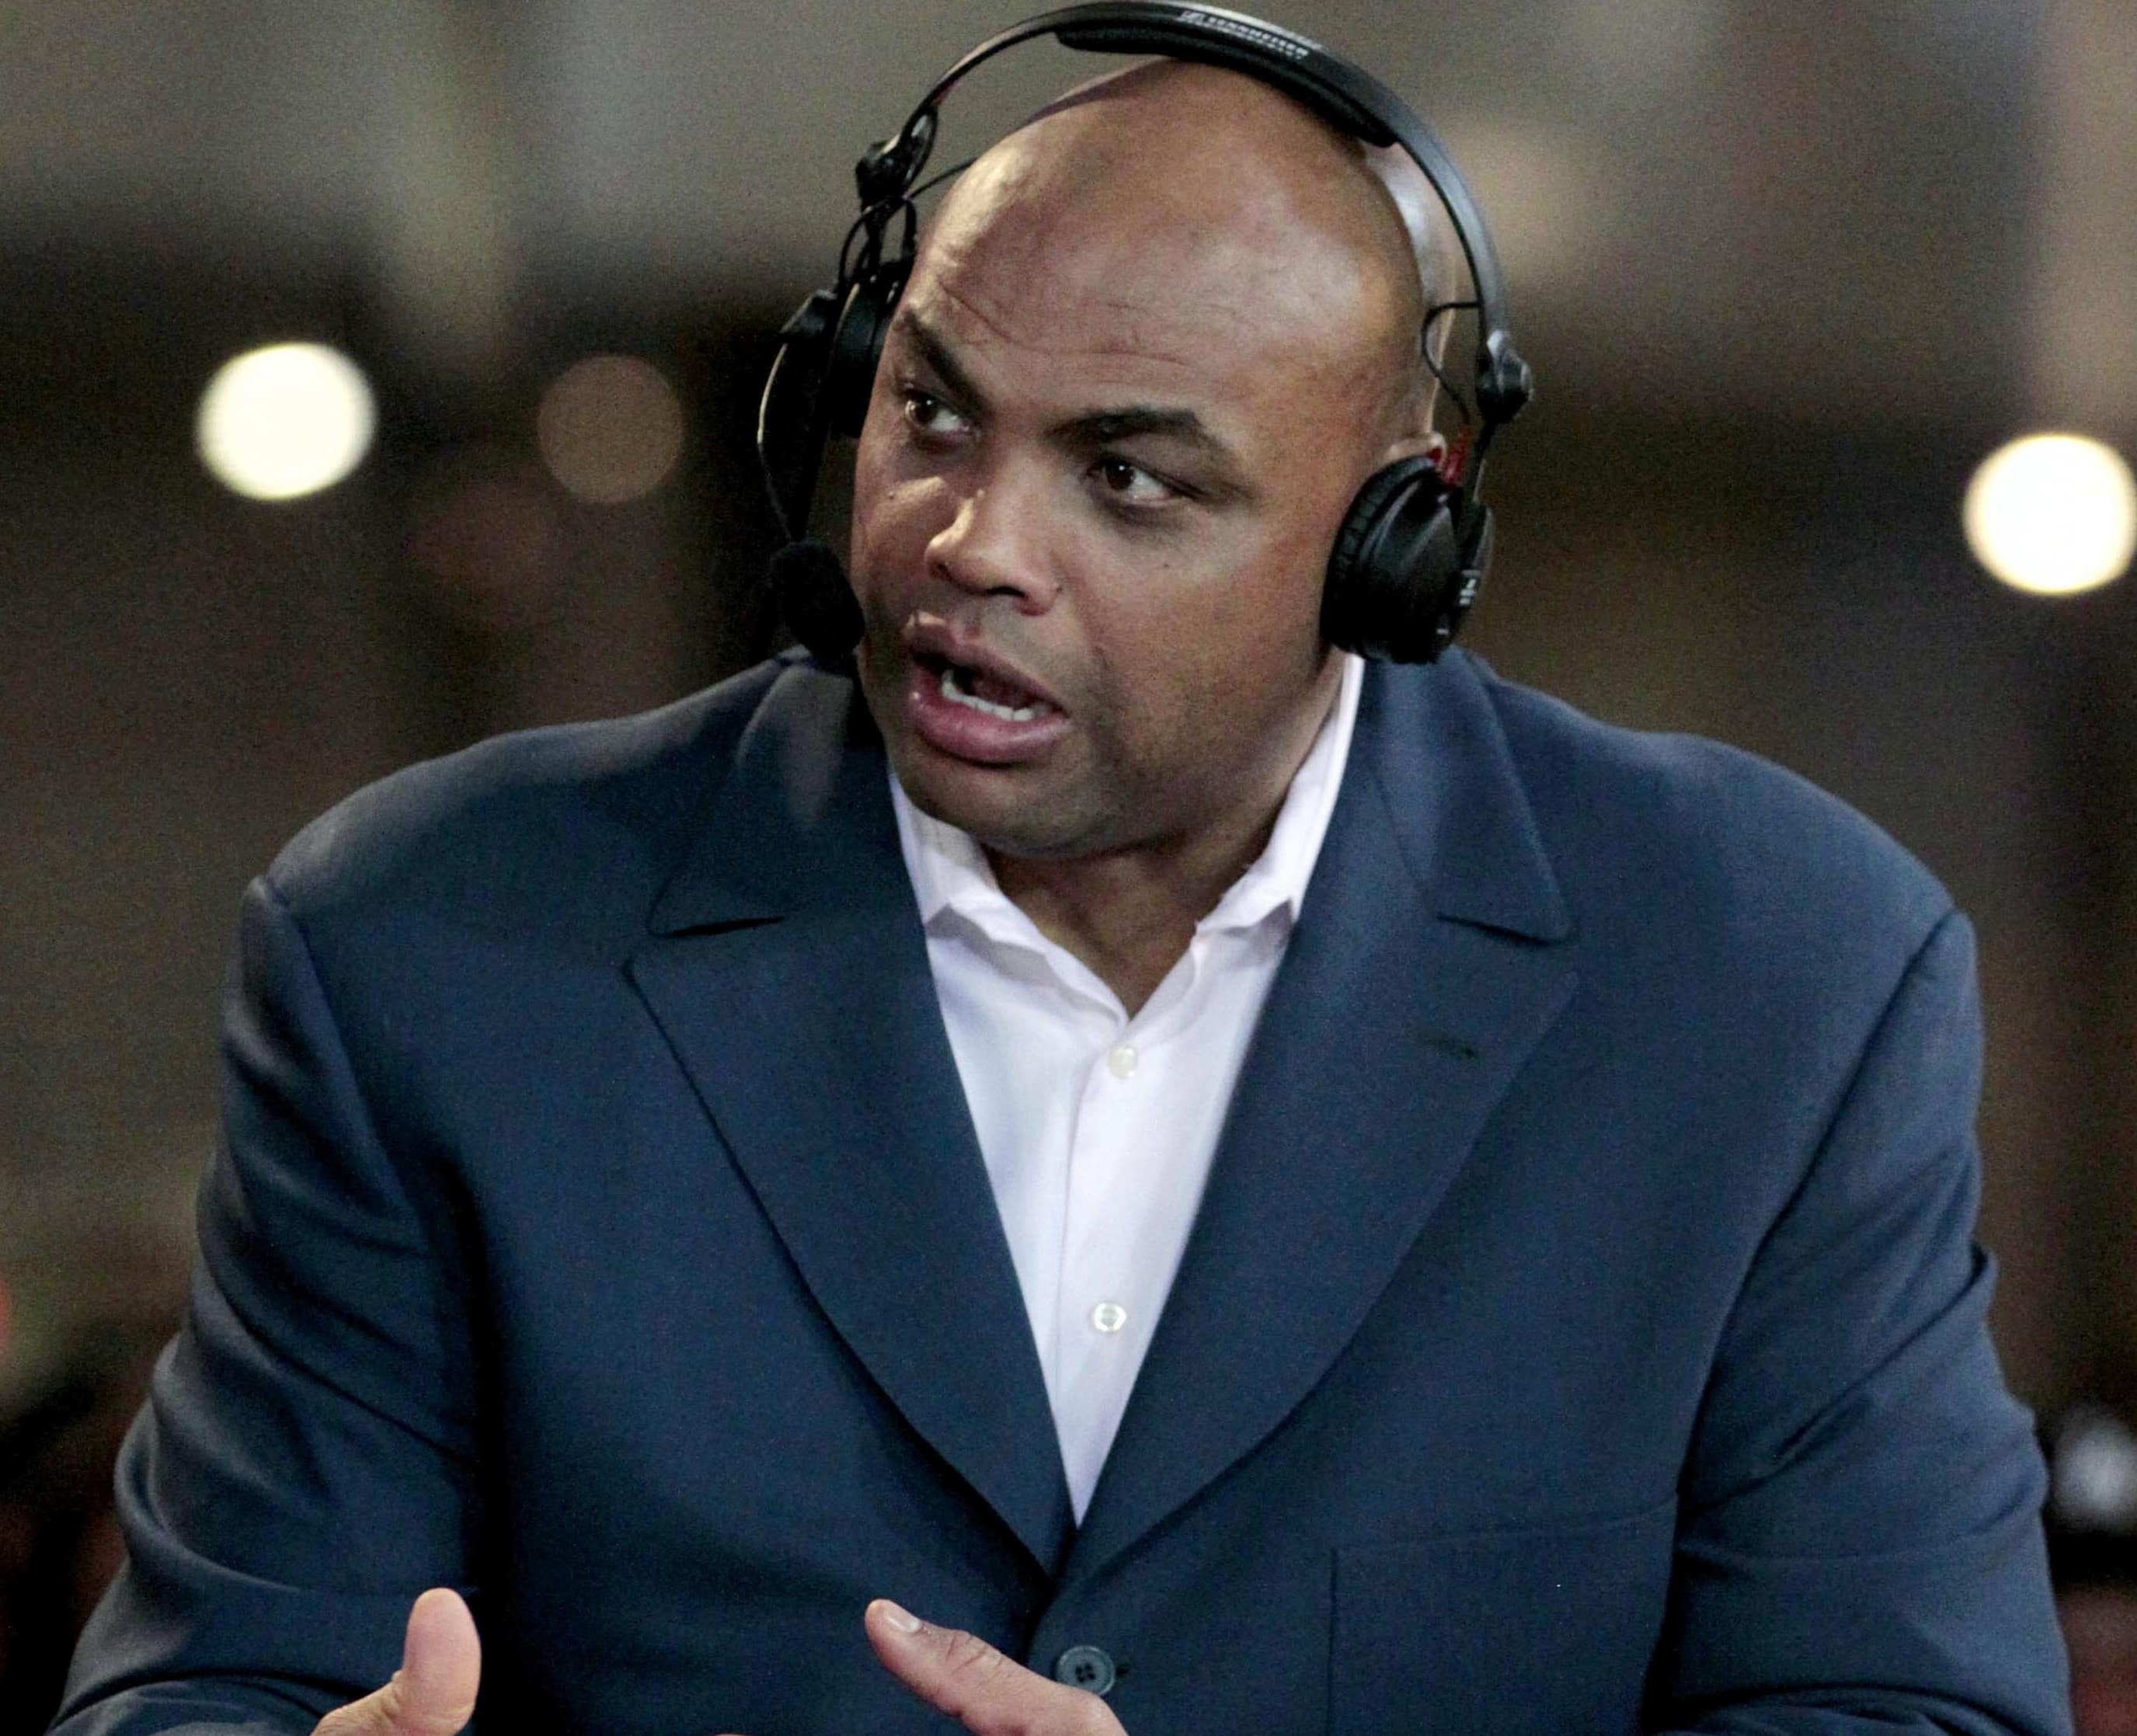 Charles Barkley defends NCAA: Kids go to college for free